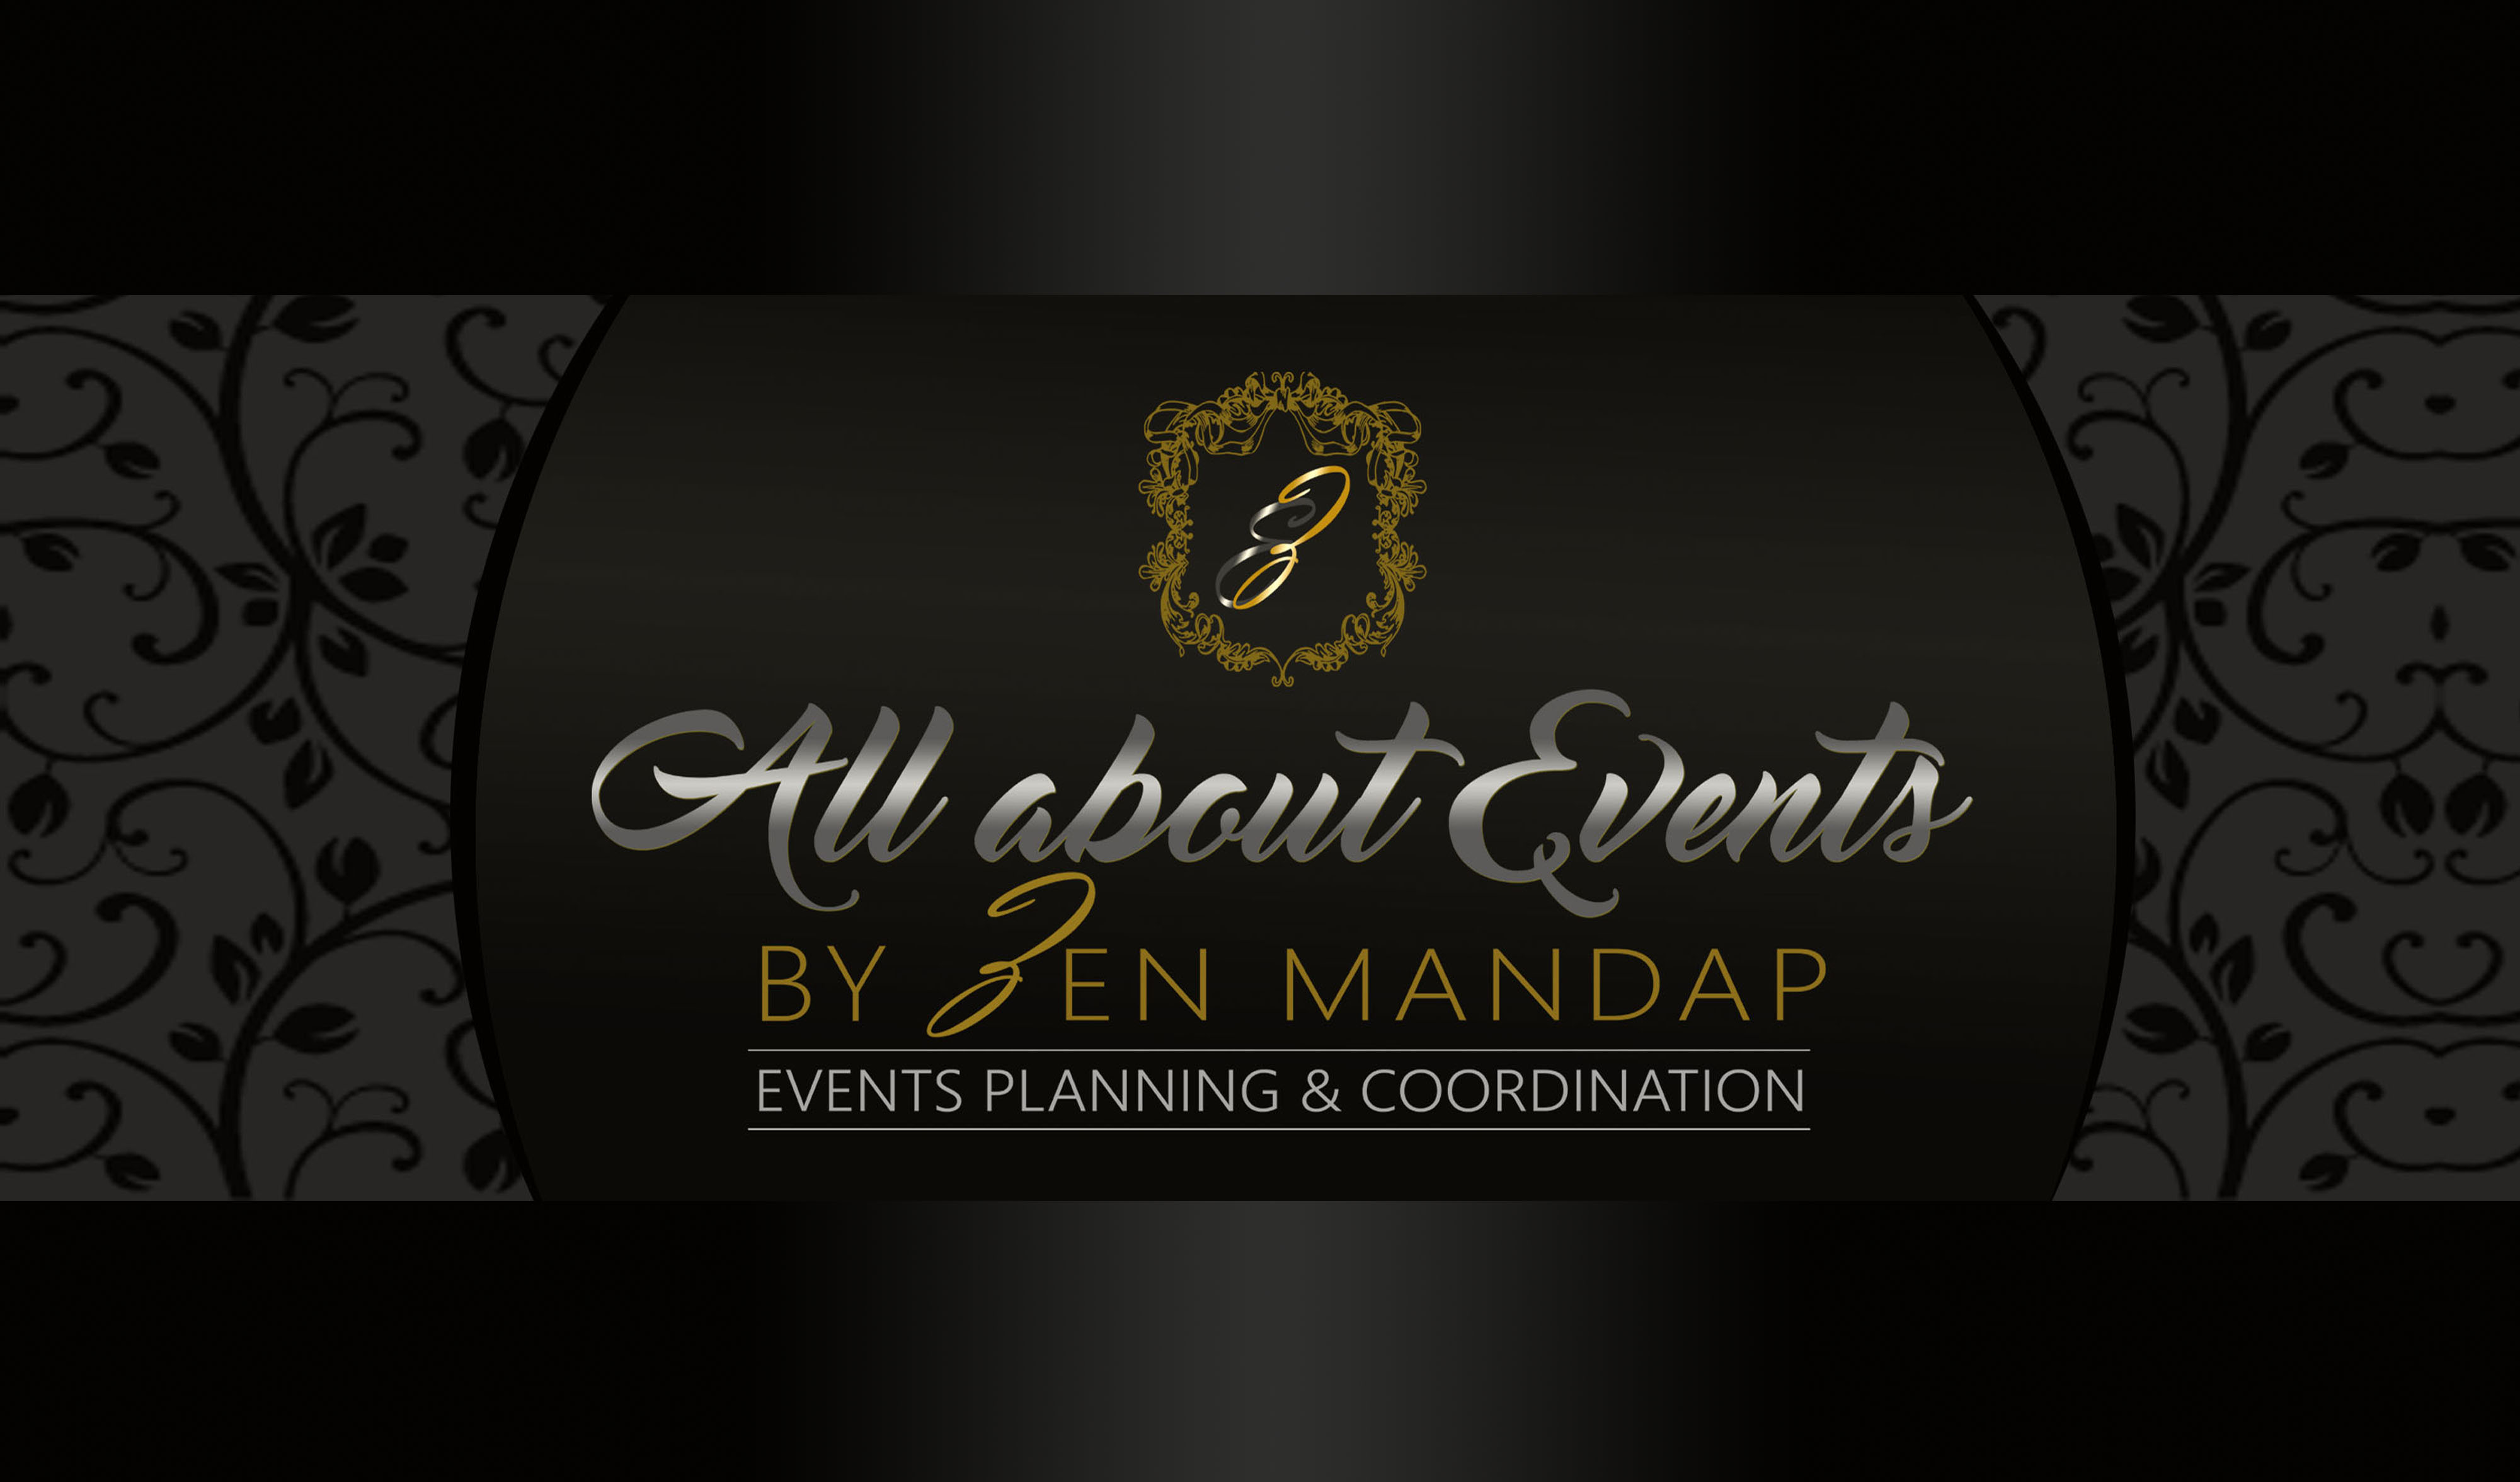 All about Events by Zen Mandap